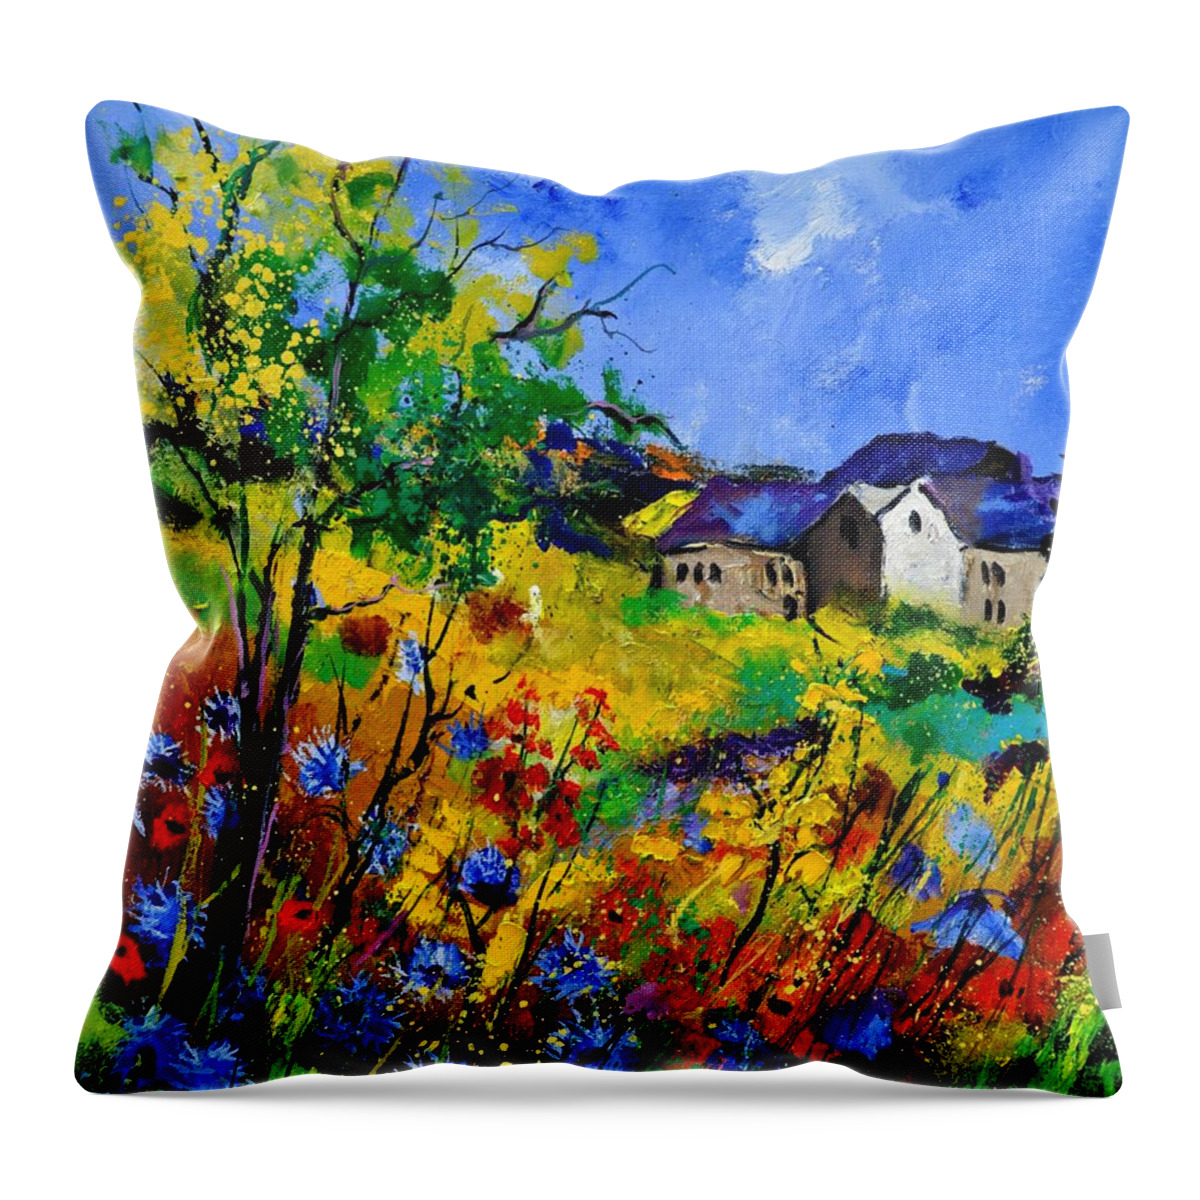 Landscape Throw Pillow featuring the painting Summer 673180 by Pol Ledent